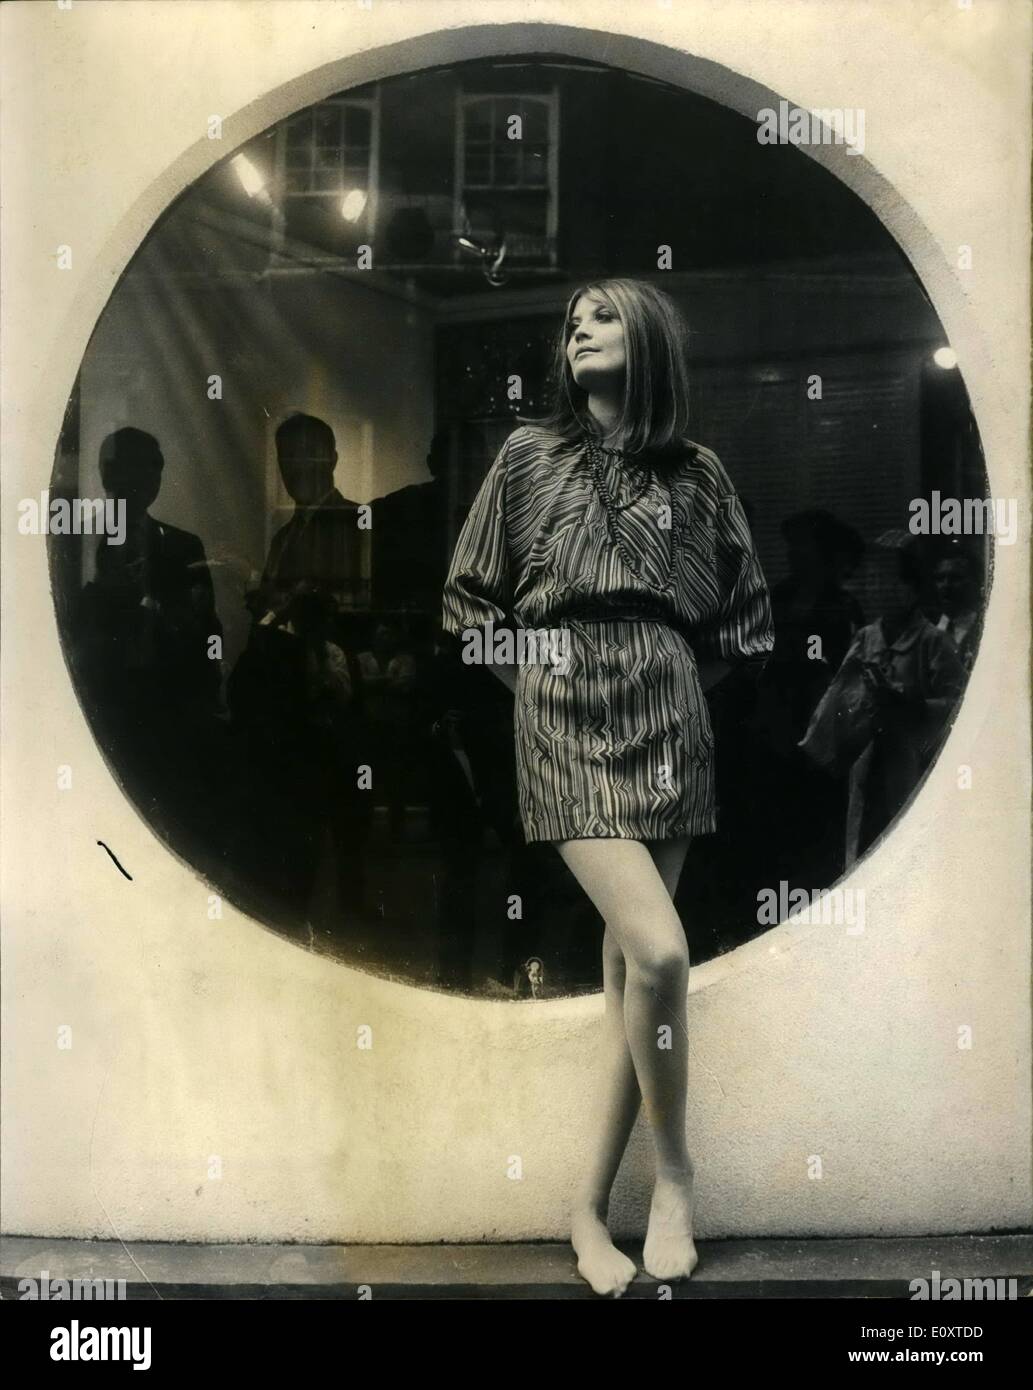 Sep. 09, 1967 - Sandie Shaw's First Range of Clothes: The first range of clothes designed by singer Sandie Shaw was shown in London today. Picture Shows: Sandie Shaw seen wearing a Kaftan which she designed - at today's showing in London. Prices. Stock Photo